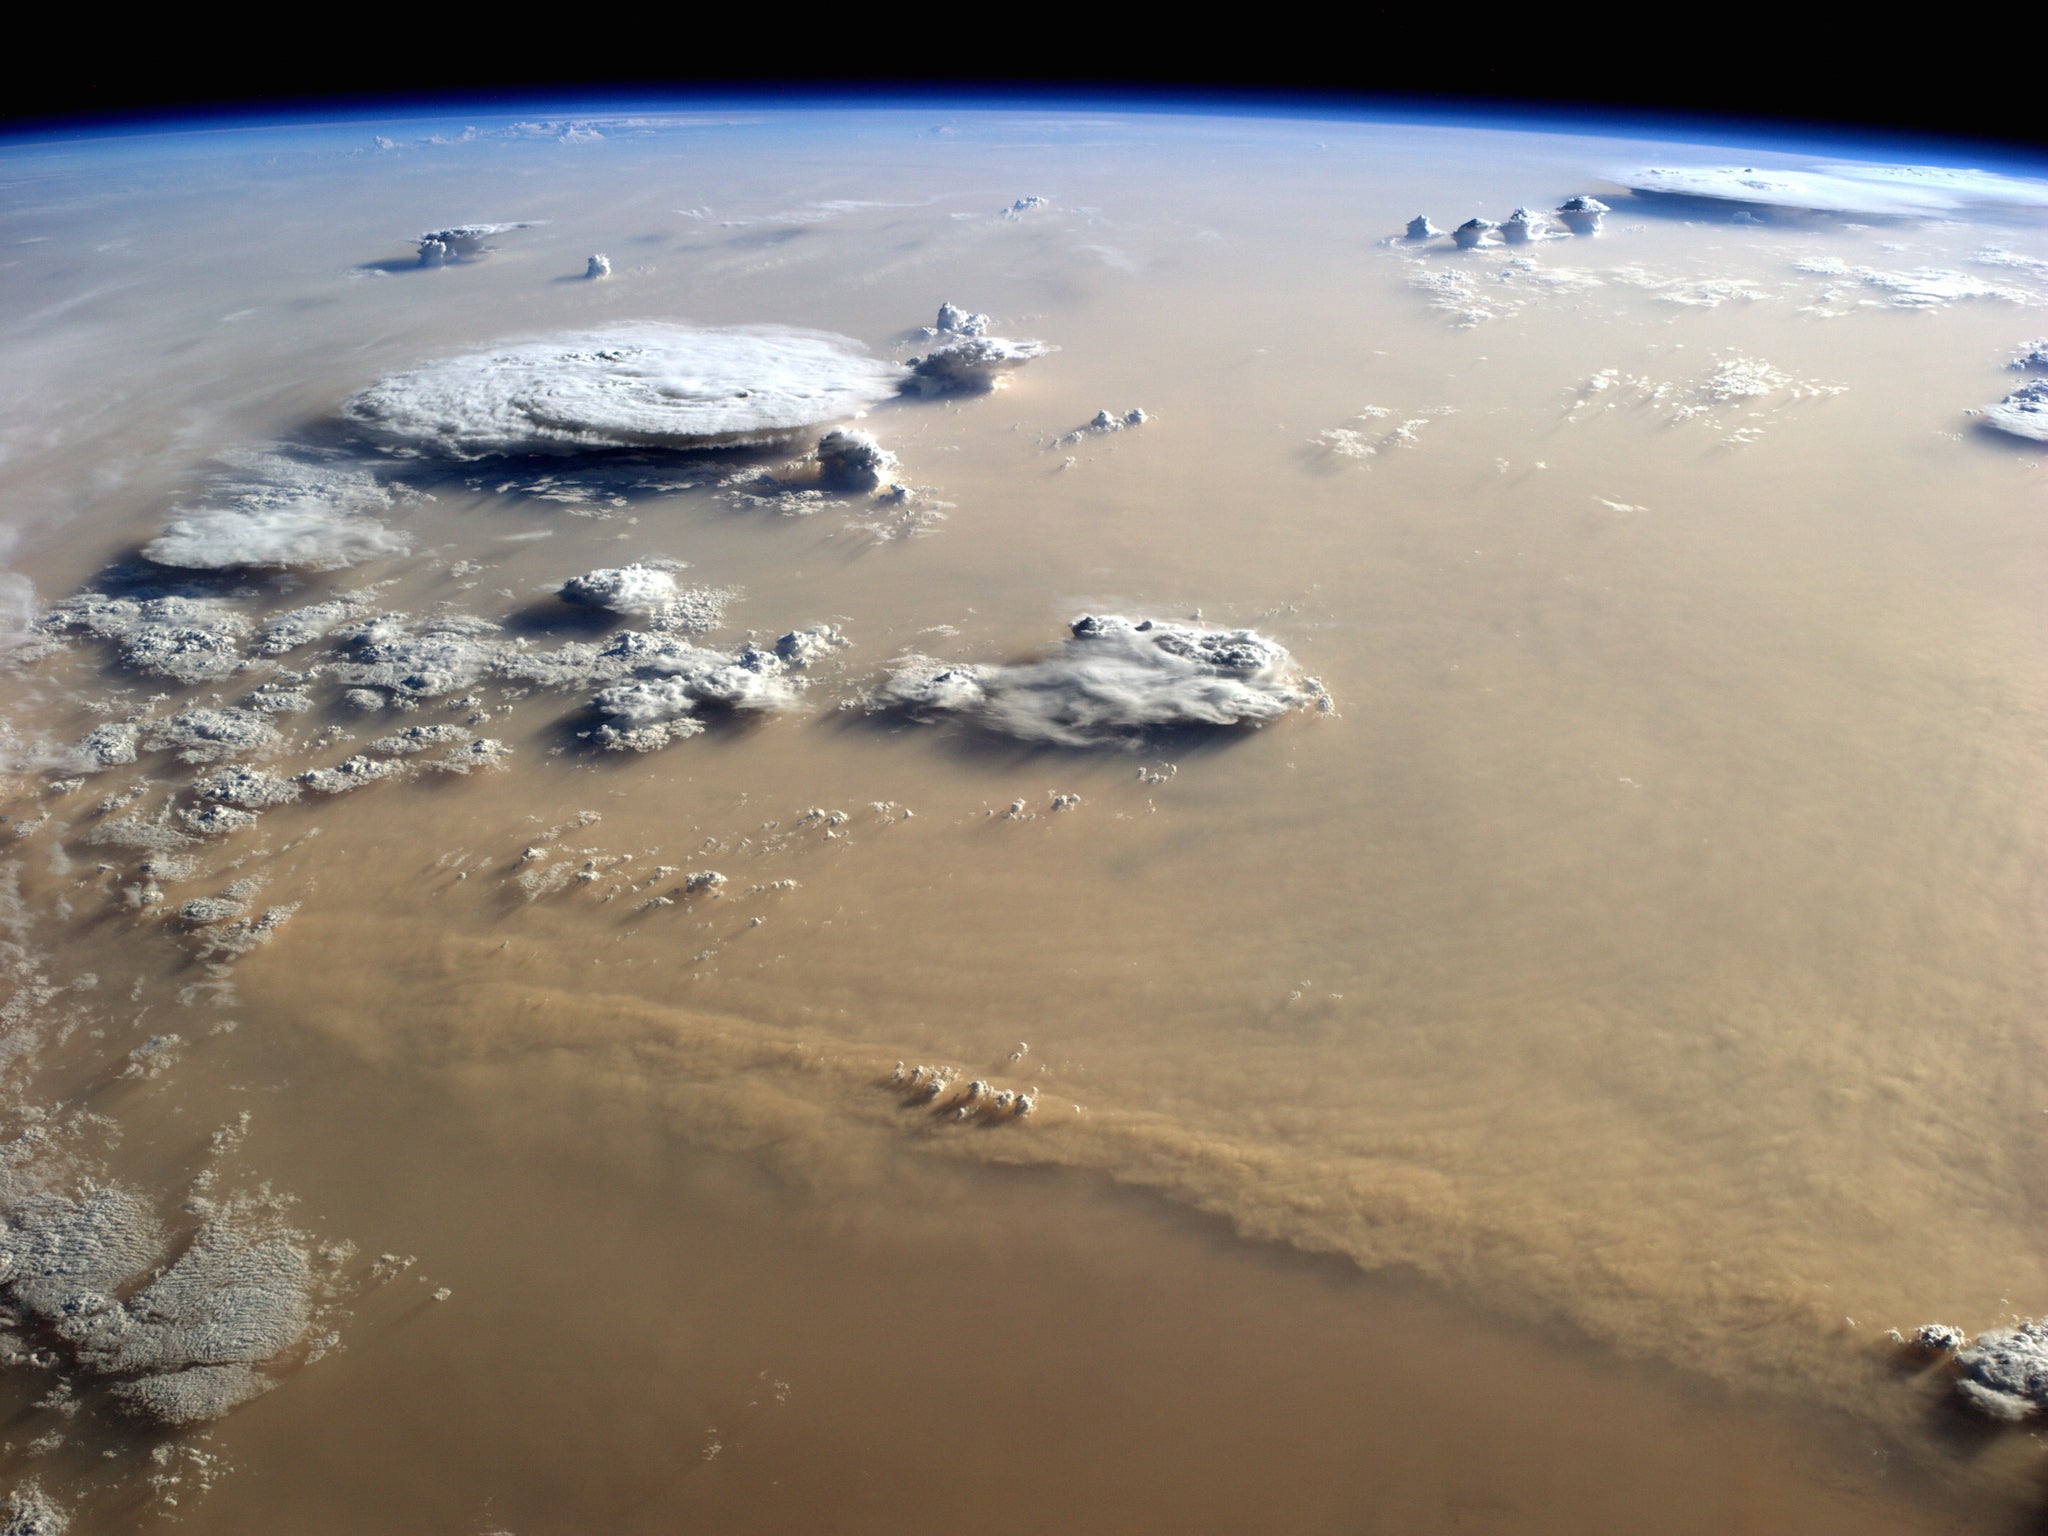 Scientists have measured the amount of dust carried from the Sahara to the Amazon rainforest